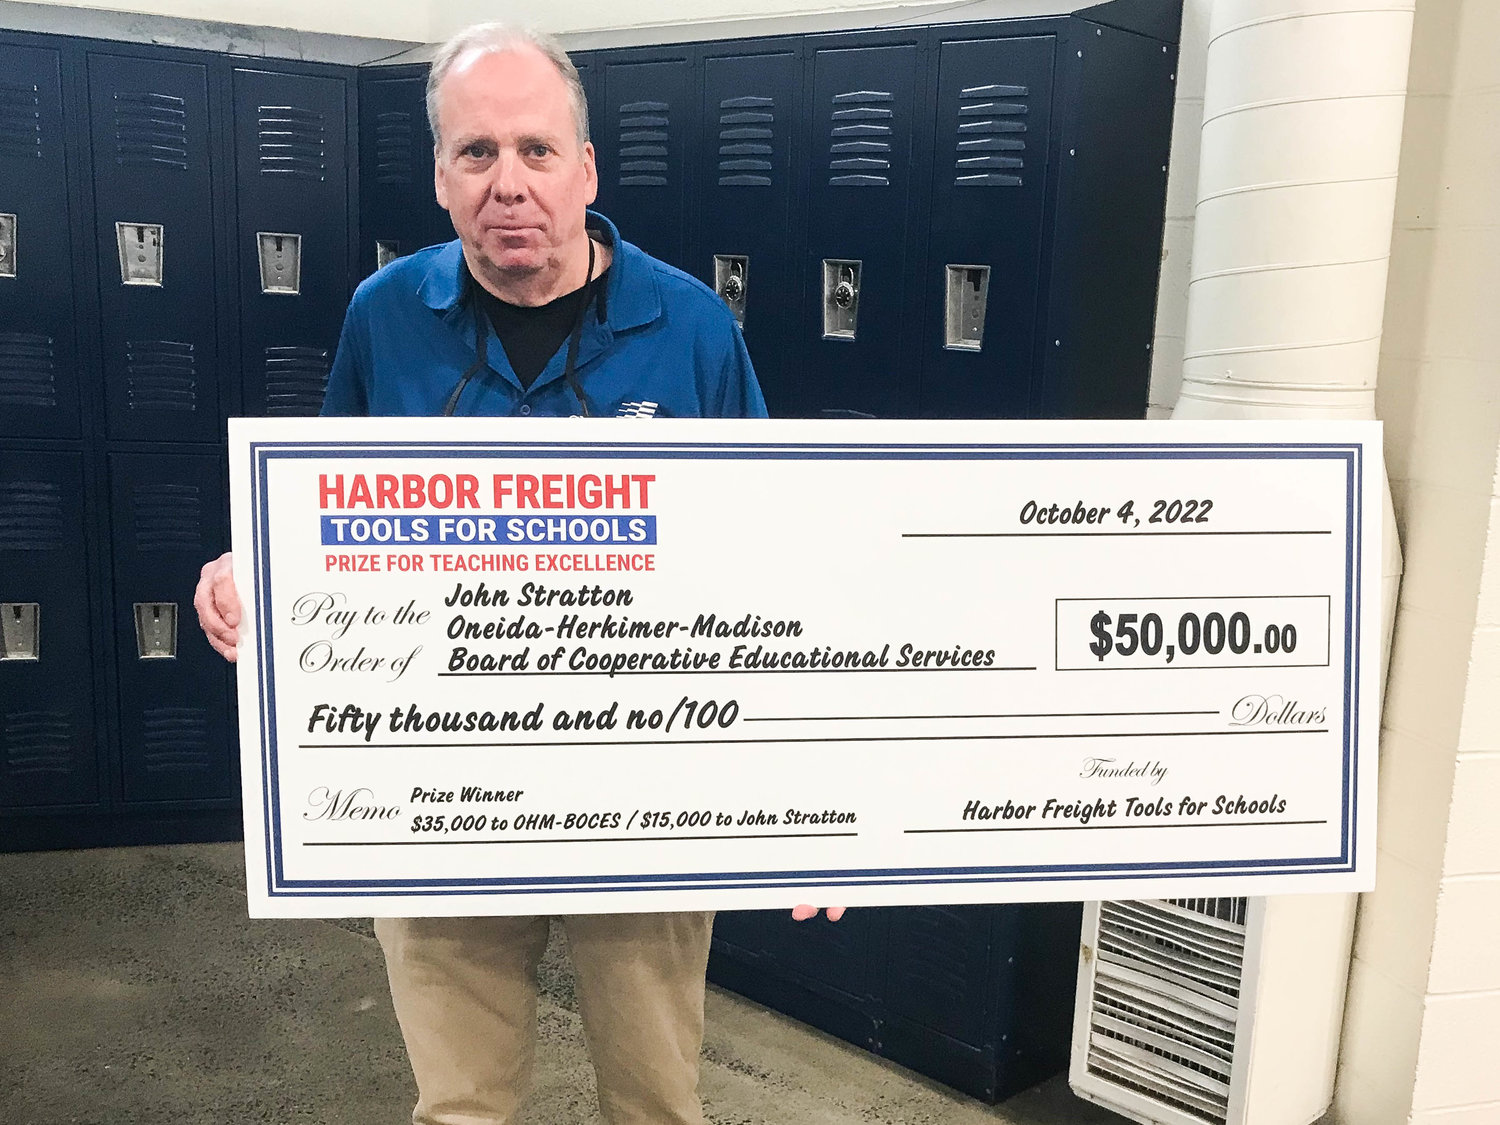 Automotive technology teacher John Stratton holds the $50,000 ceremonial big check presented to him Tuesday by Harbor Freight District Manager David Zinicola at Oneida-Herkimer-Madison BOCES in New Hartford.